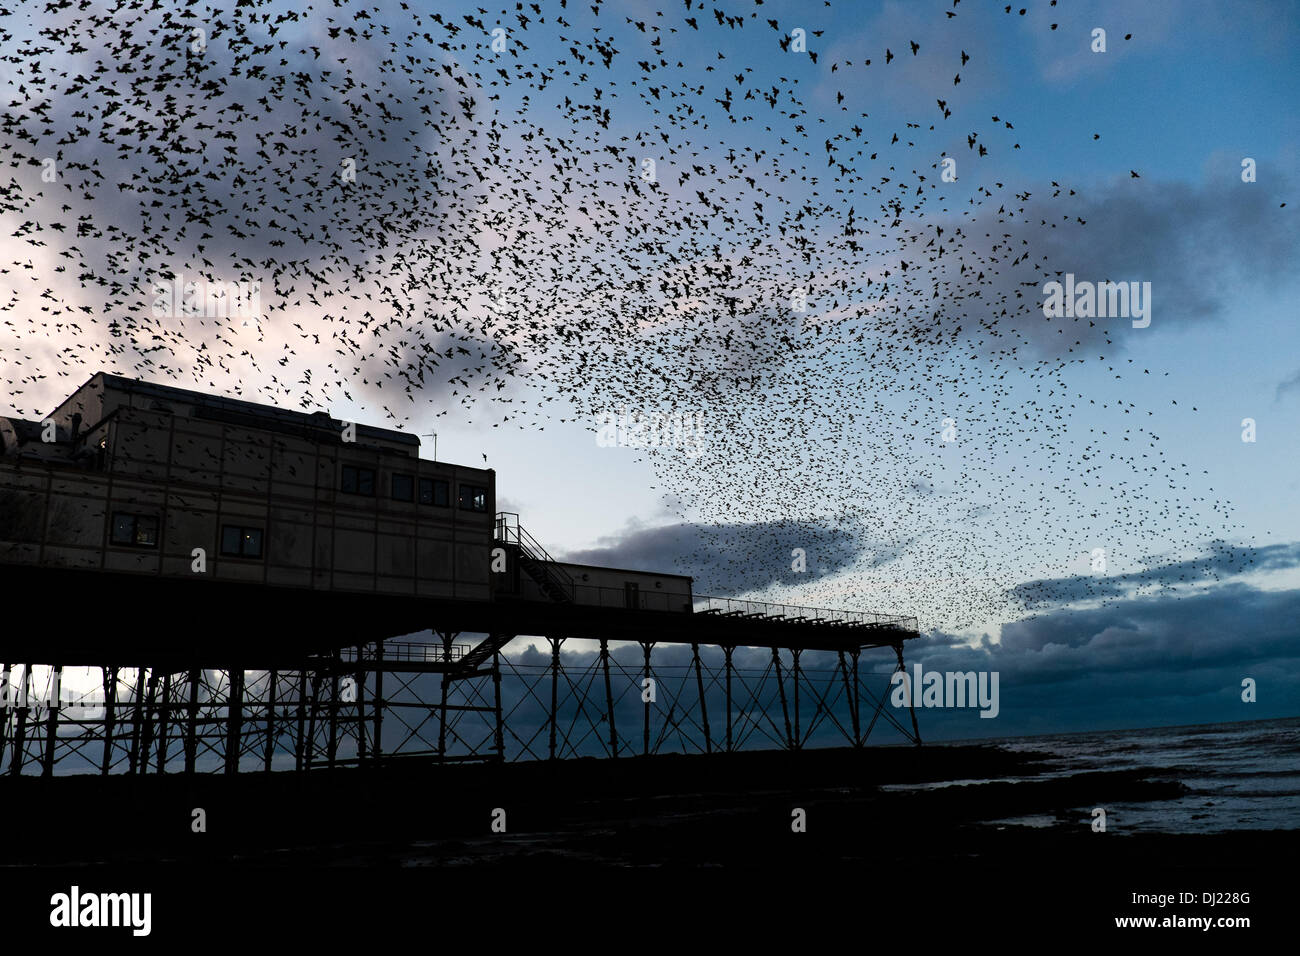 Aberystwyth Wales UK. Tuesday 19 November 2013 Tens of thousands of starlings flying in to roost on the cast iron legs of the Victorian seaside pier in Aberystwyth on the west wales coast, UK. Every evening the birds return from feeding and perform intricate patterns in the sky before settling for the night. Credit:  keith morris/Alamy Live News Stock Photo